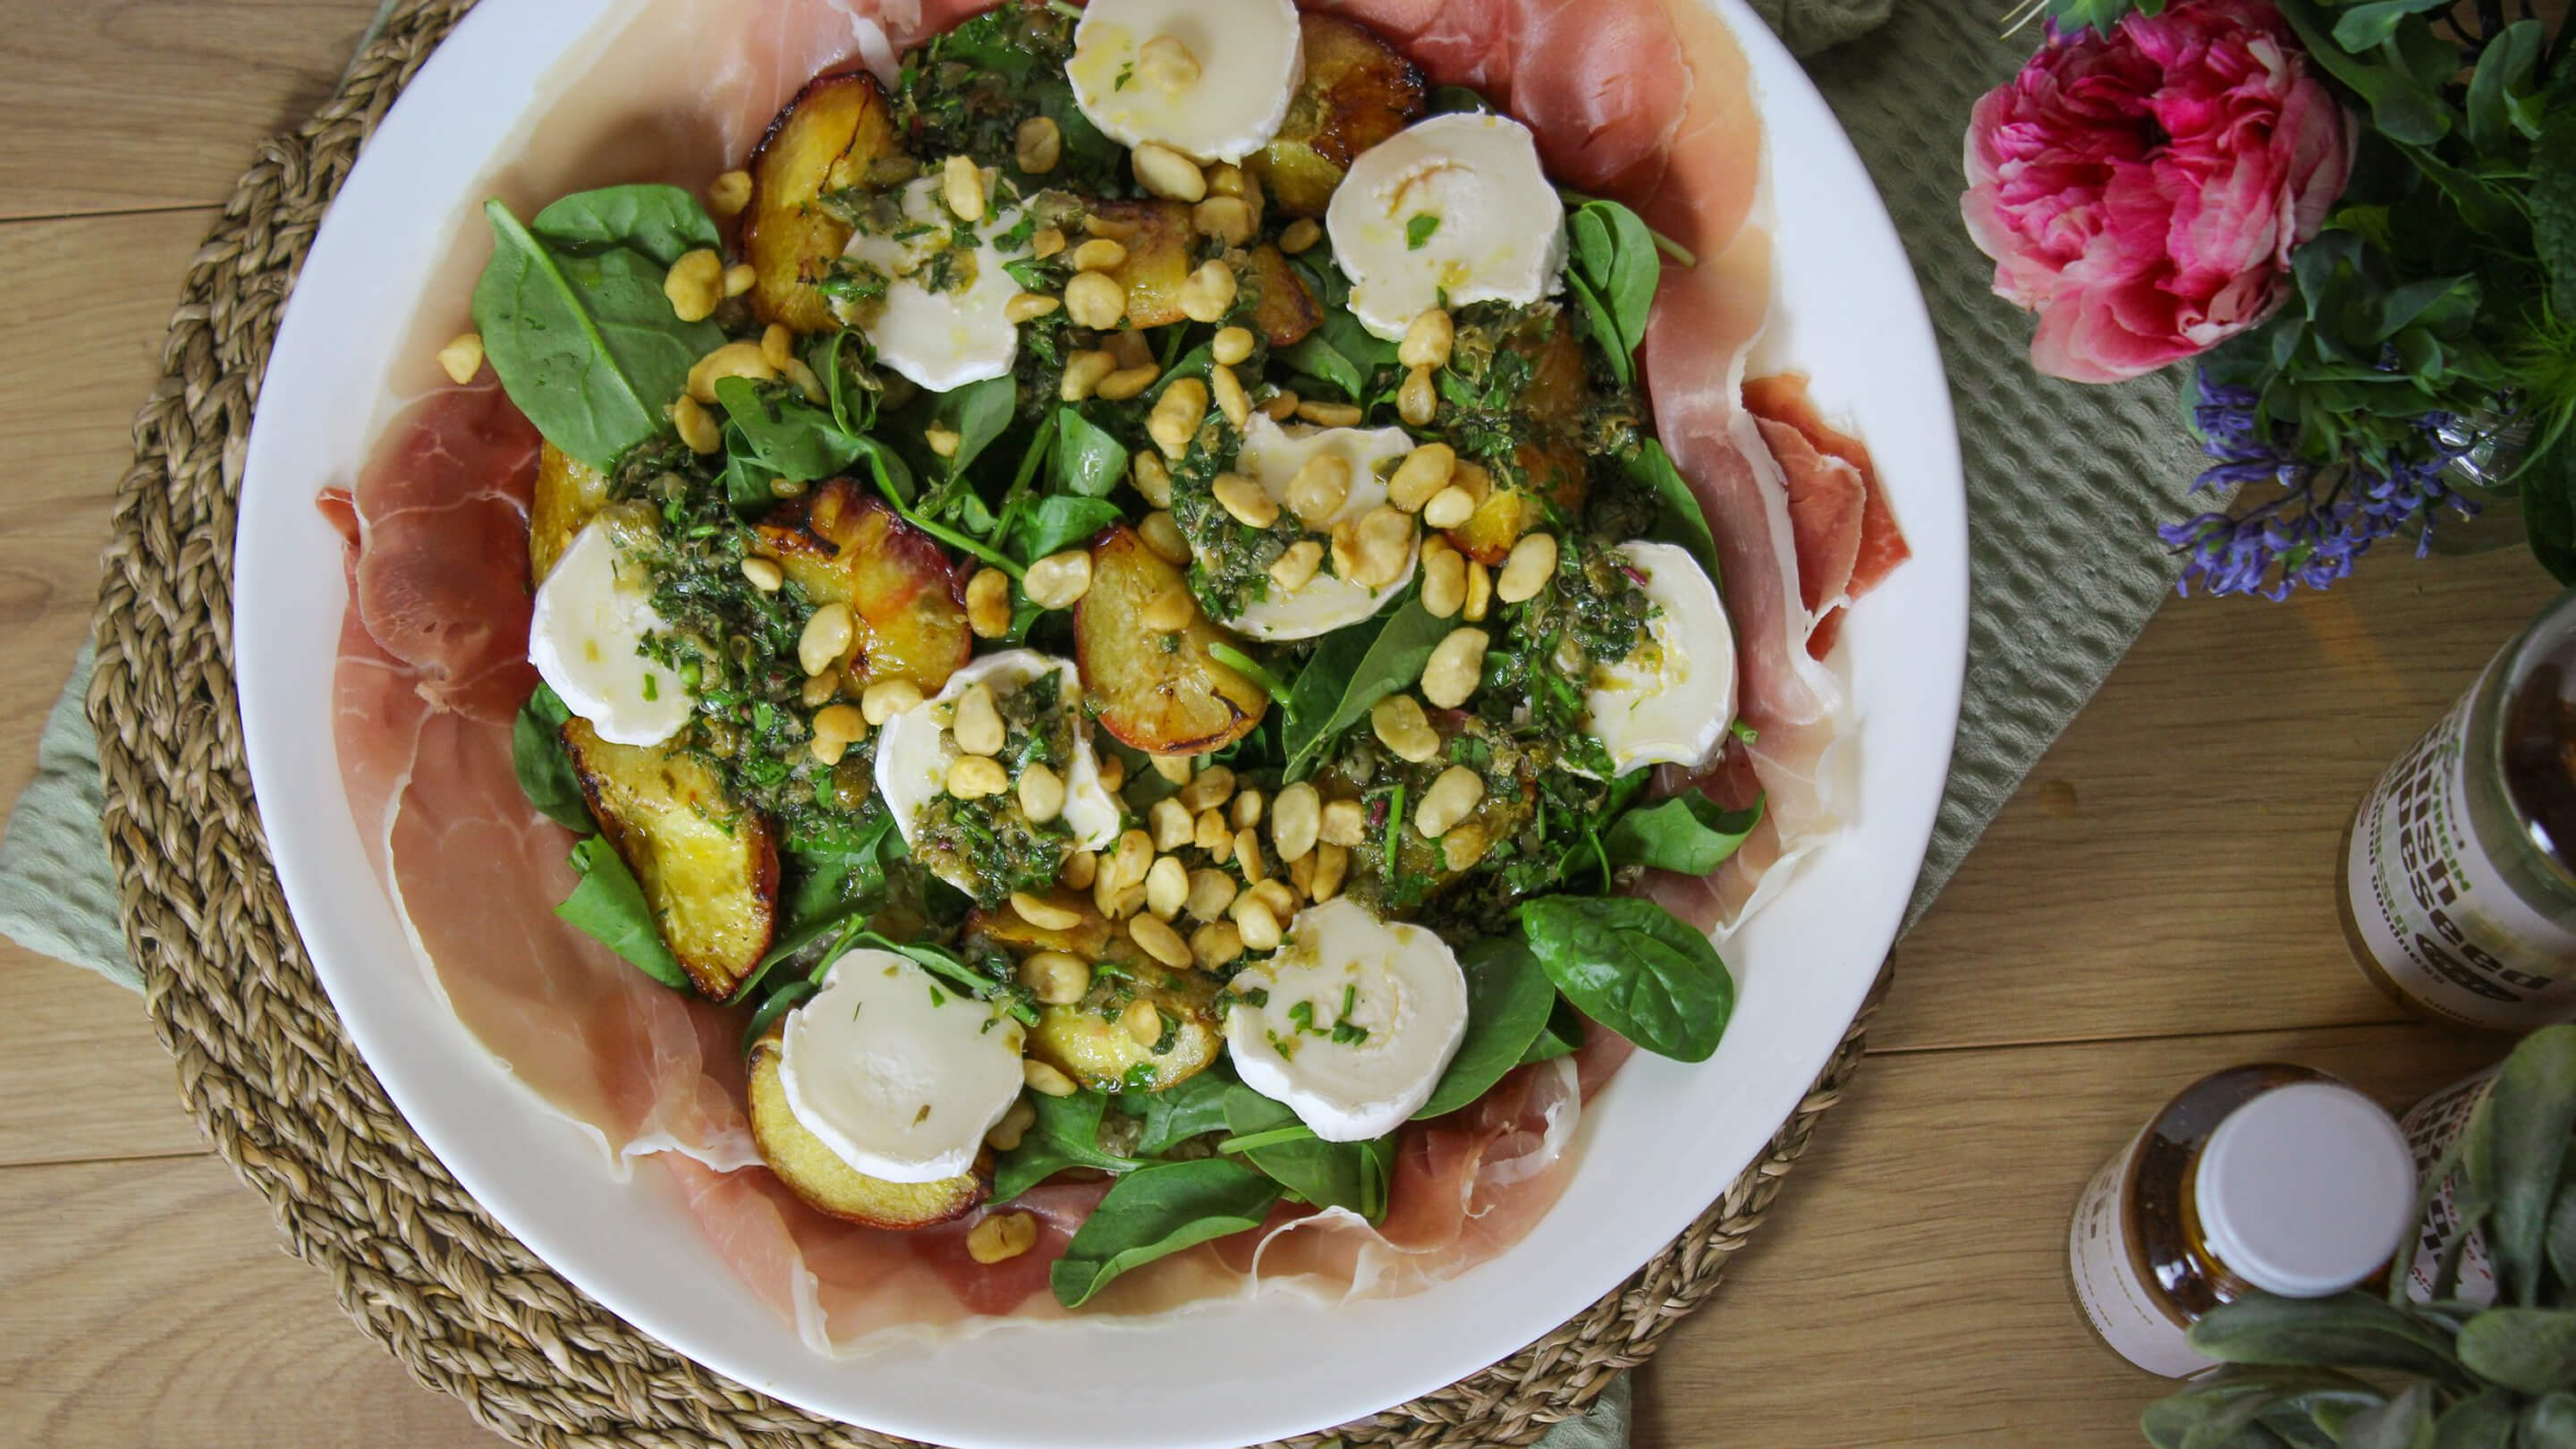 Roasted Peach Salad with Parma Ham and Goats Cheese